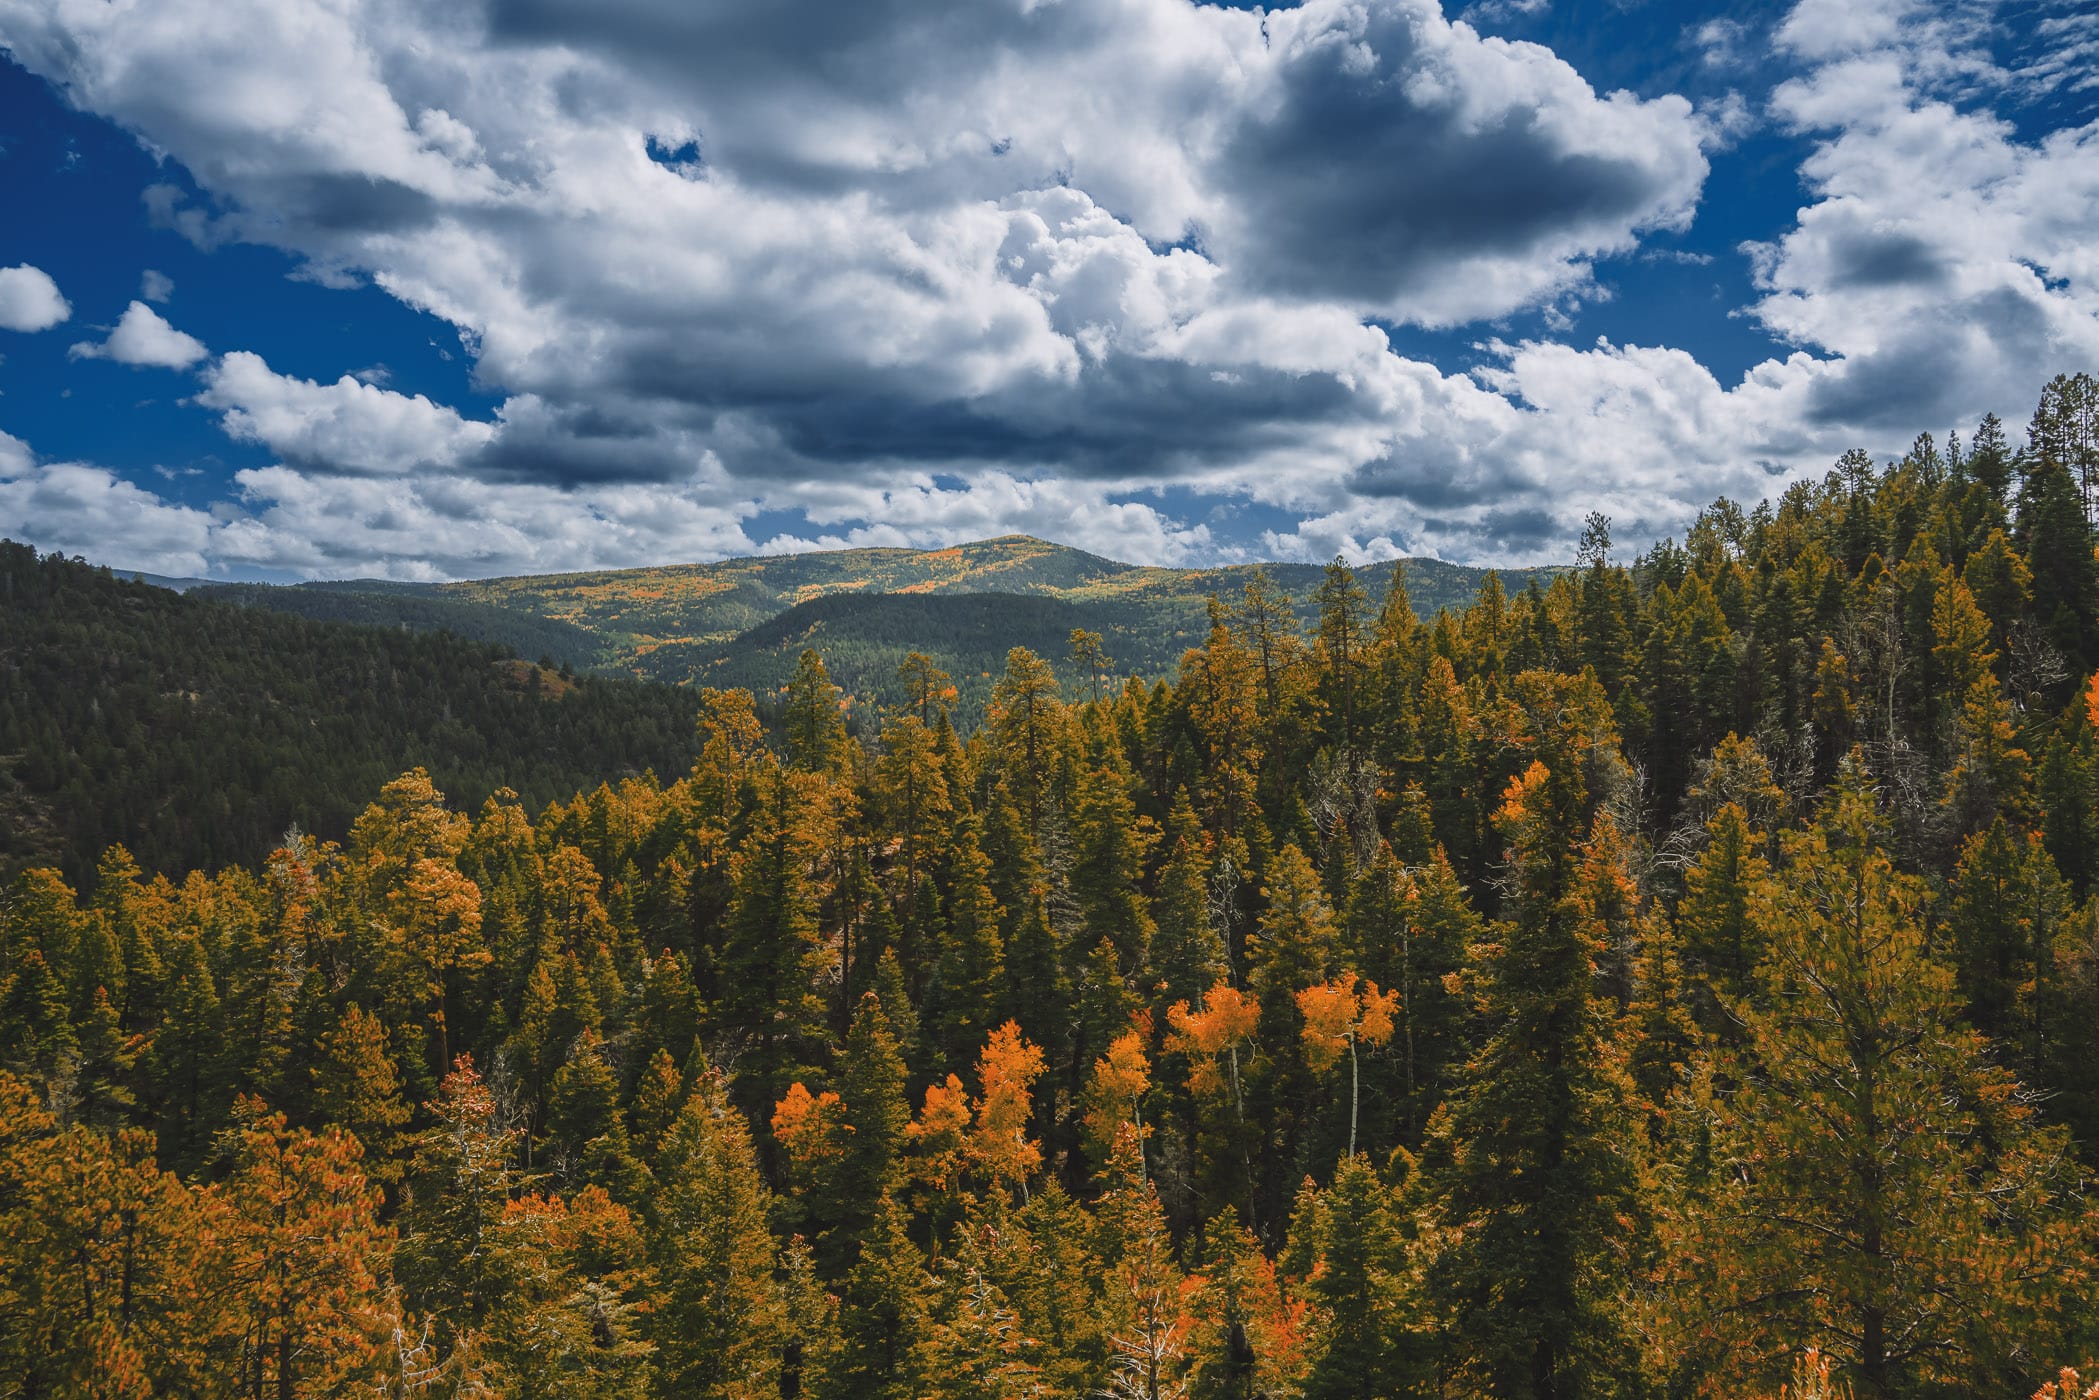 An evergreen forest stretches into the distance in the mountains south of Taos, New Mexico.